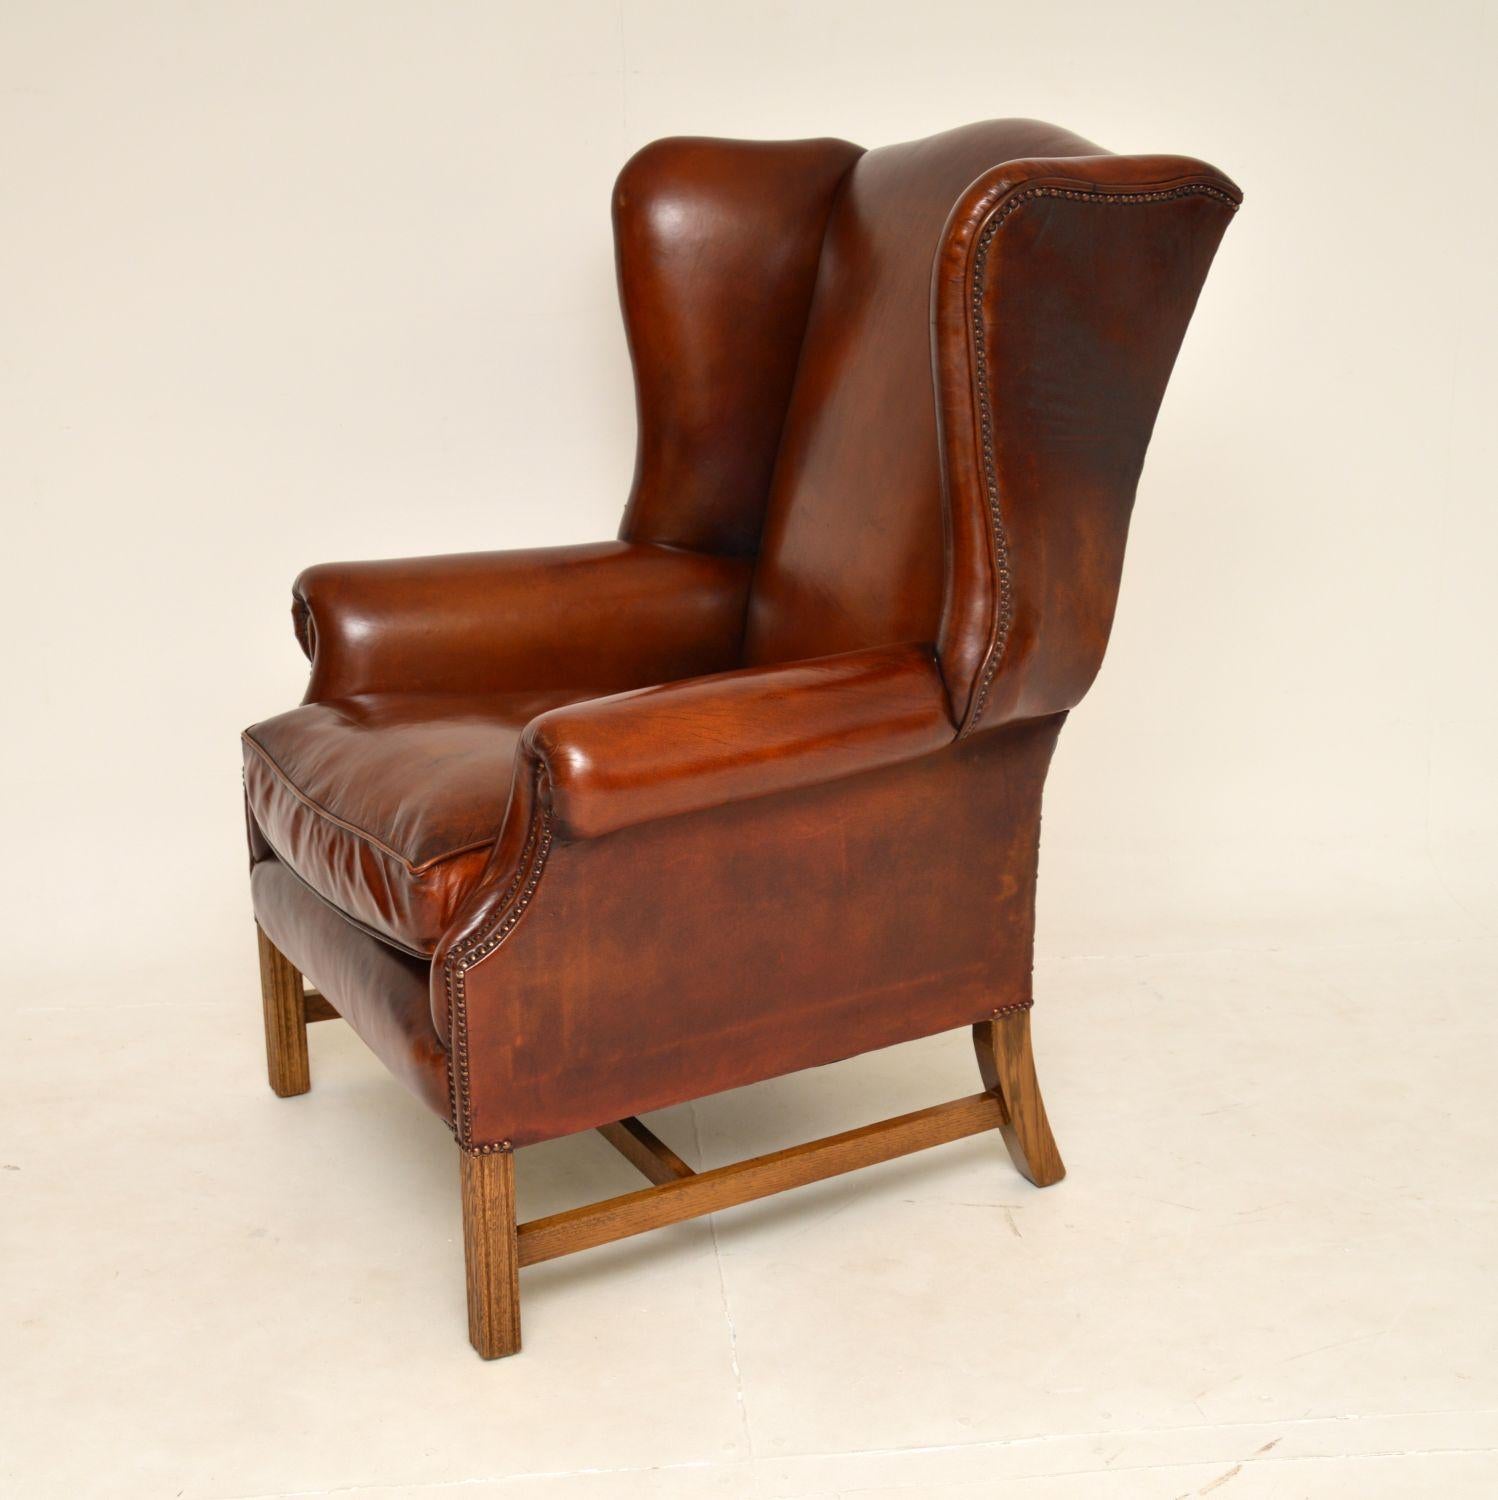 Georgian Antique Leather Wing Back Armchair